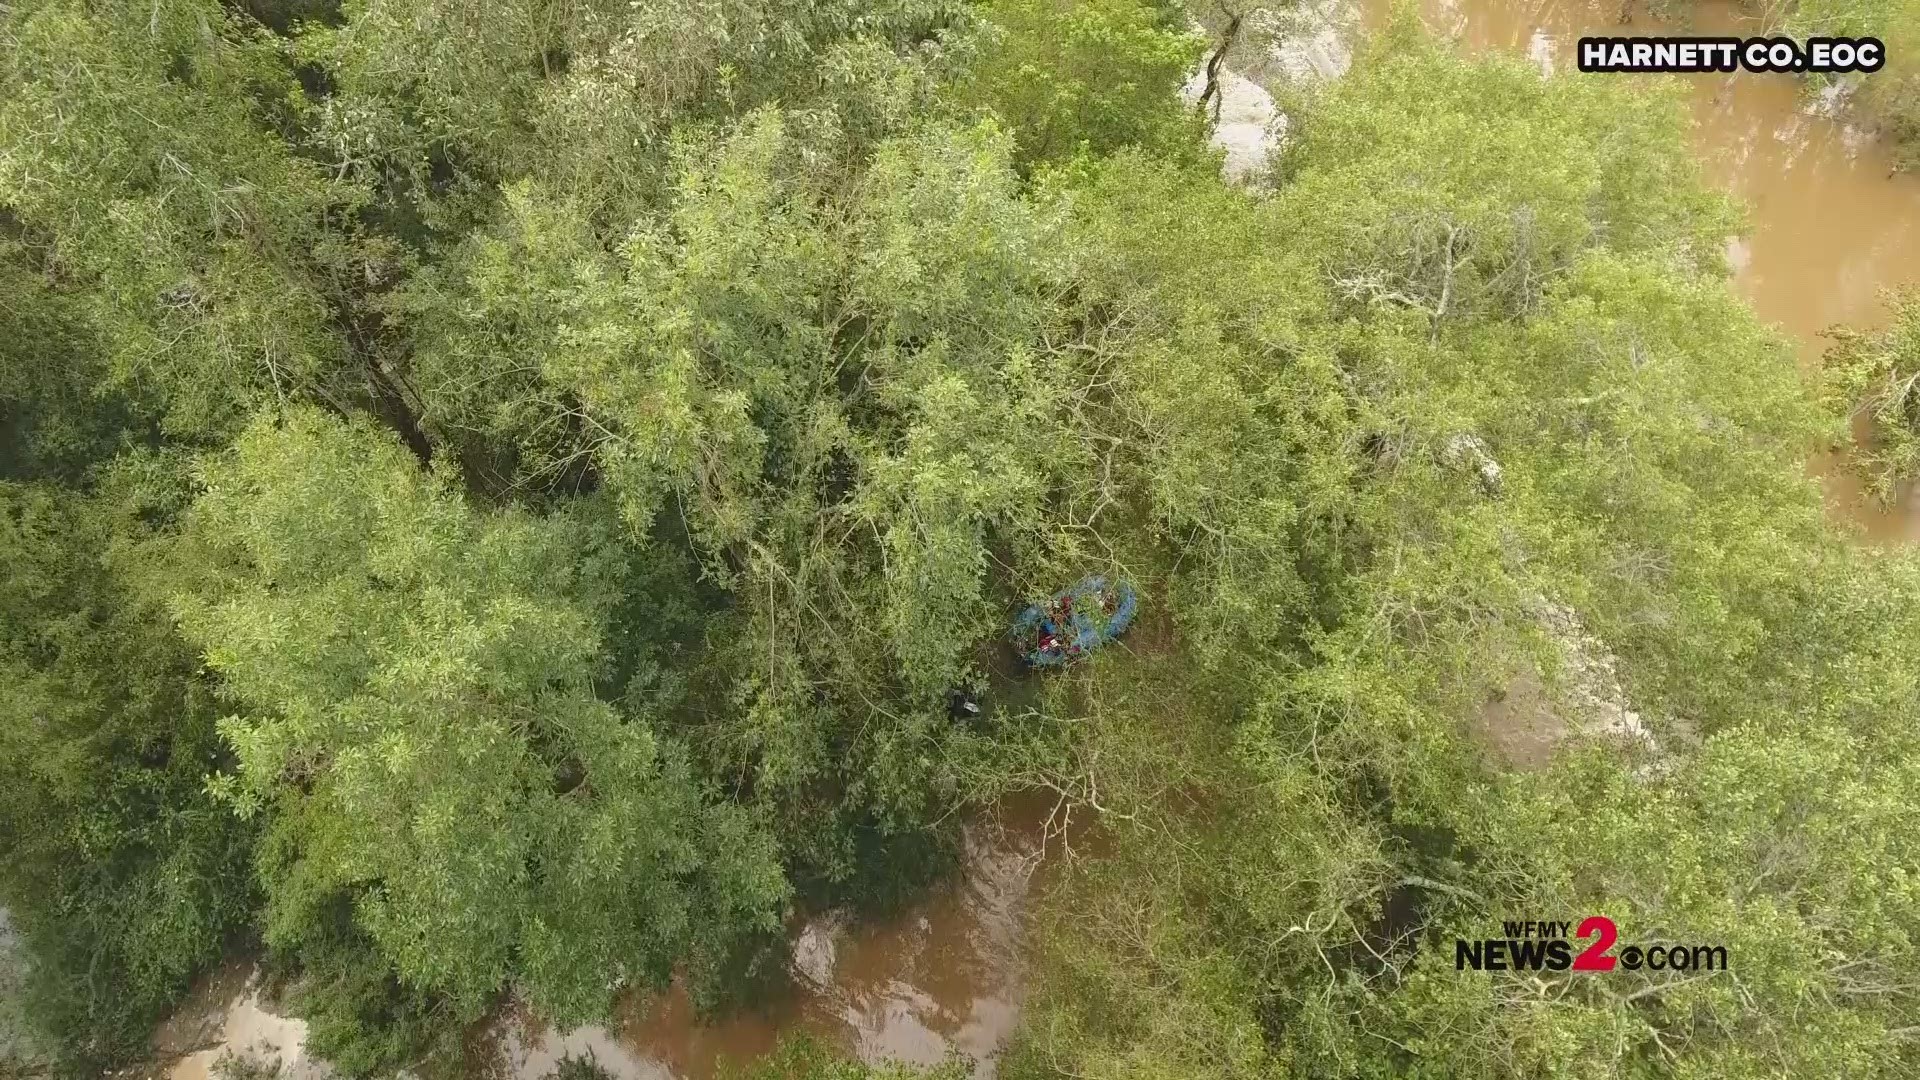 Drone video captures dramatic rescue after a driver ignored flood barriers and was swept off into the woods. Emergency crews rescued the people found on top of their vehicle. Thanks to the Davie Rescue Squad and Harnett Co. EOC for capturing the rescue.